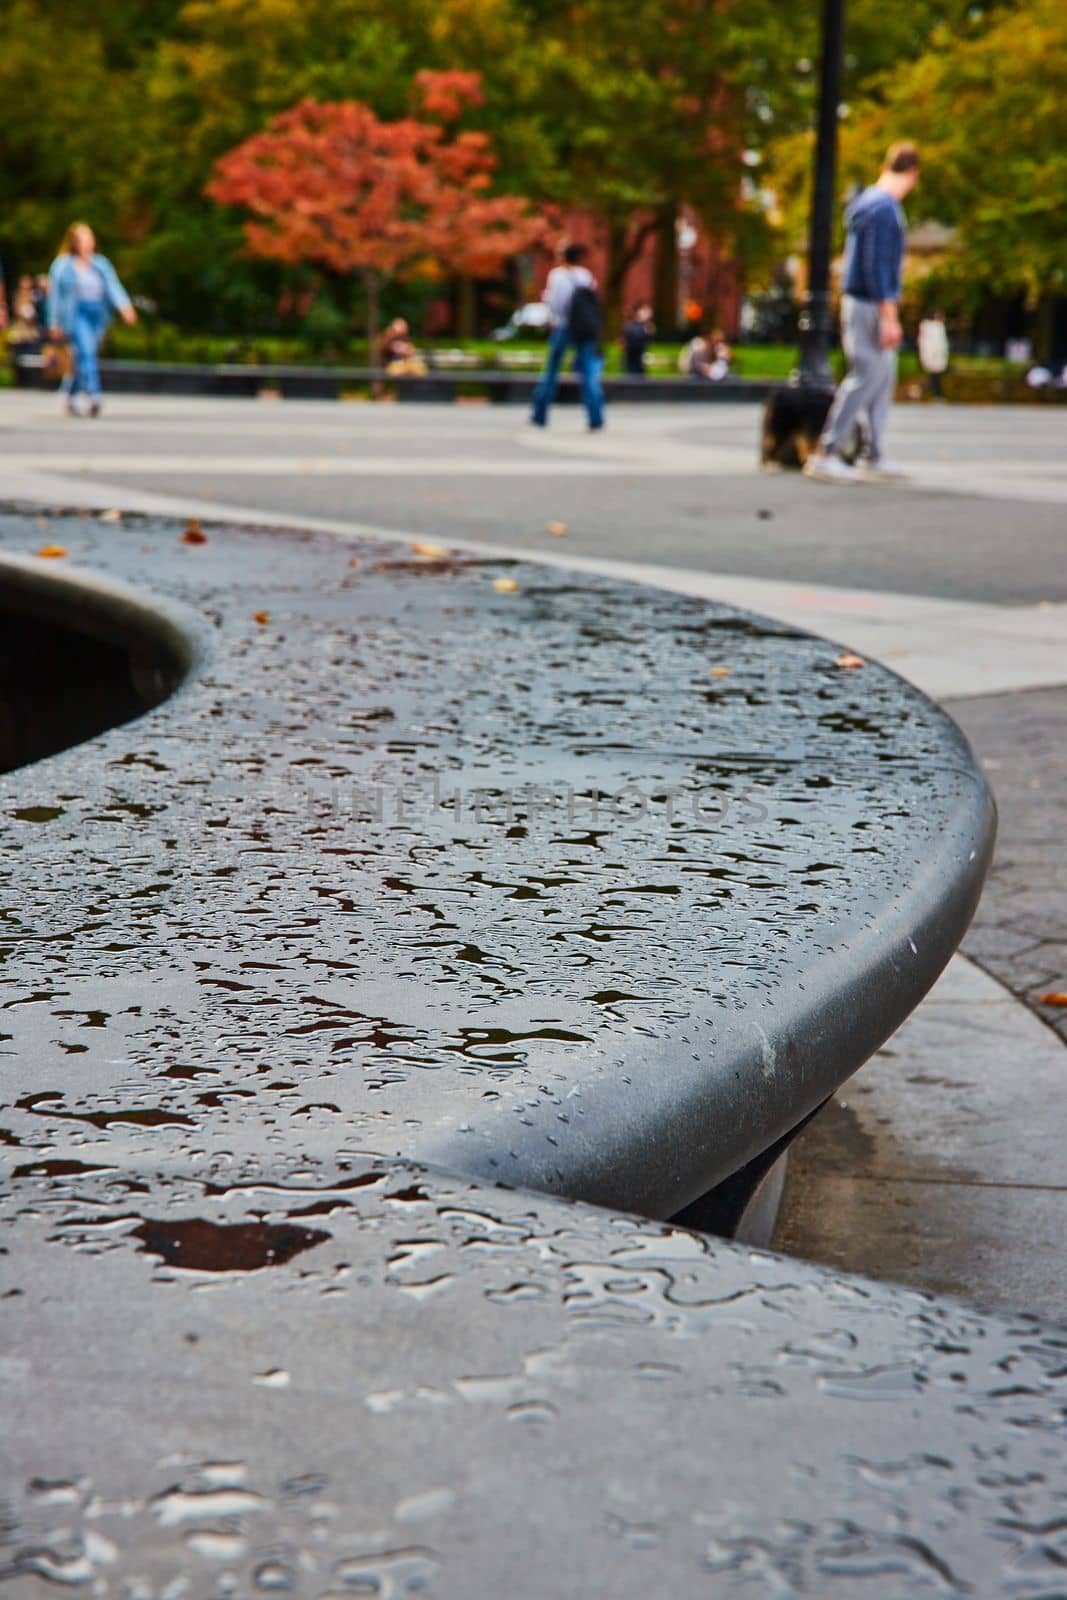 Image of Cement concrete curved seating with patches of water drops and tourists soft in background